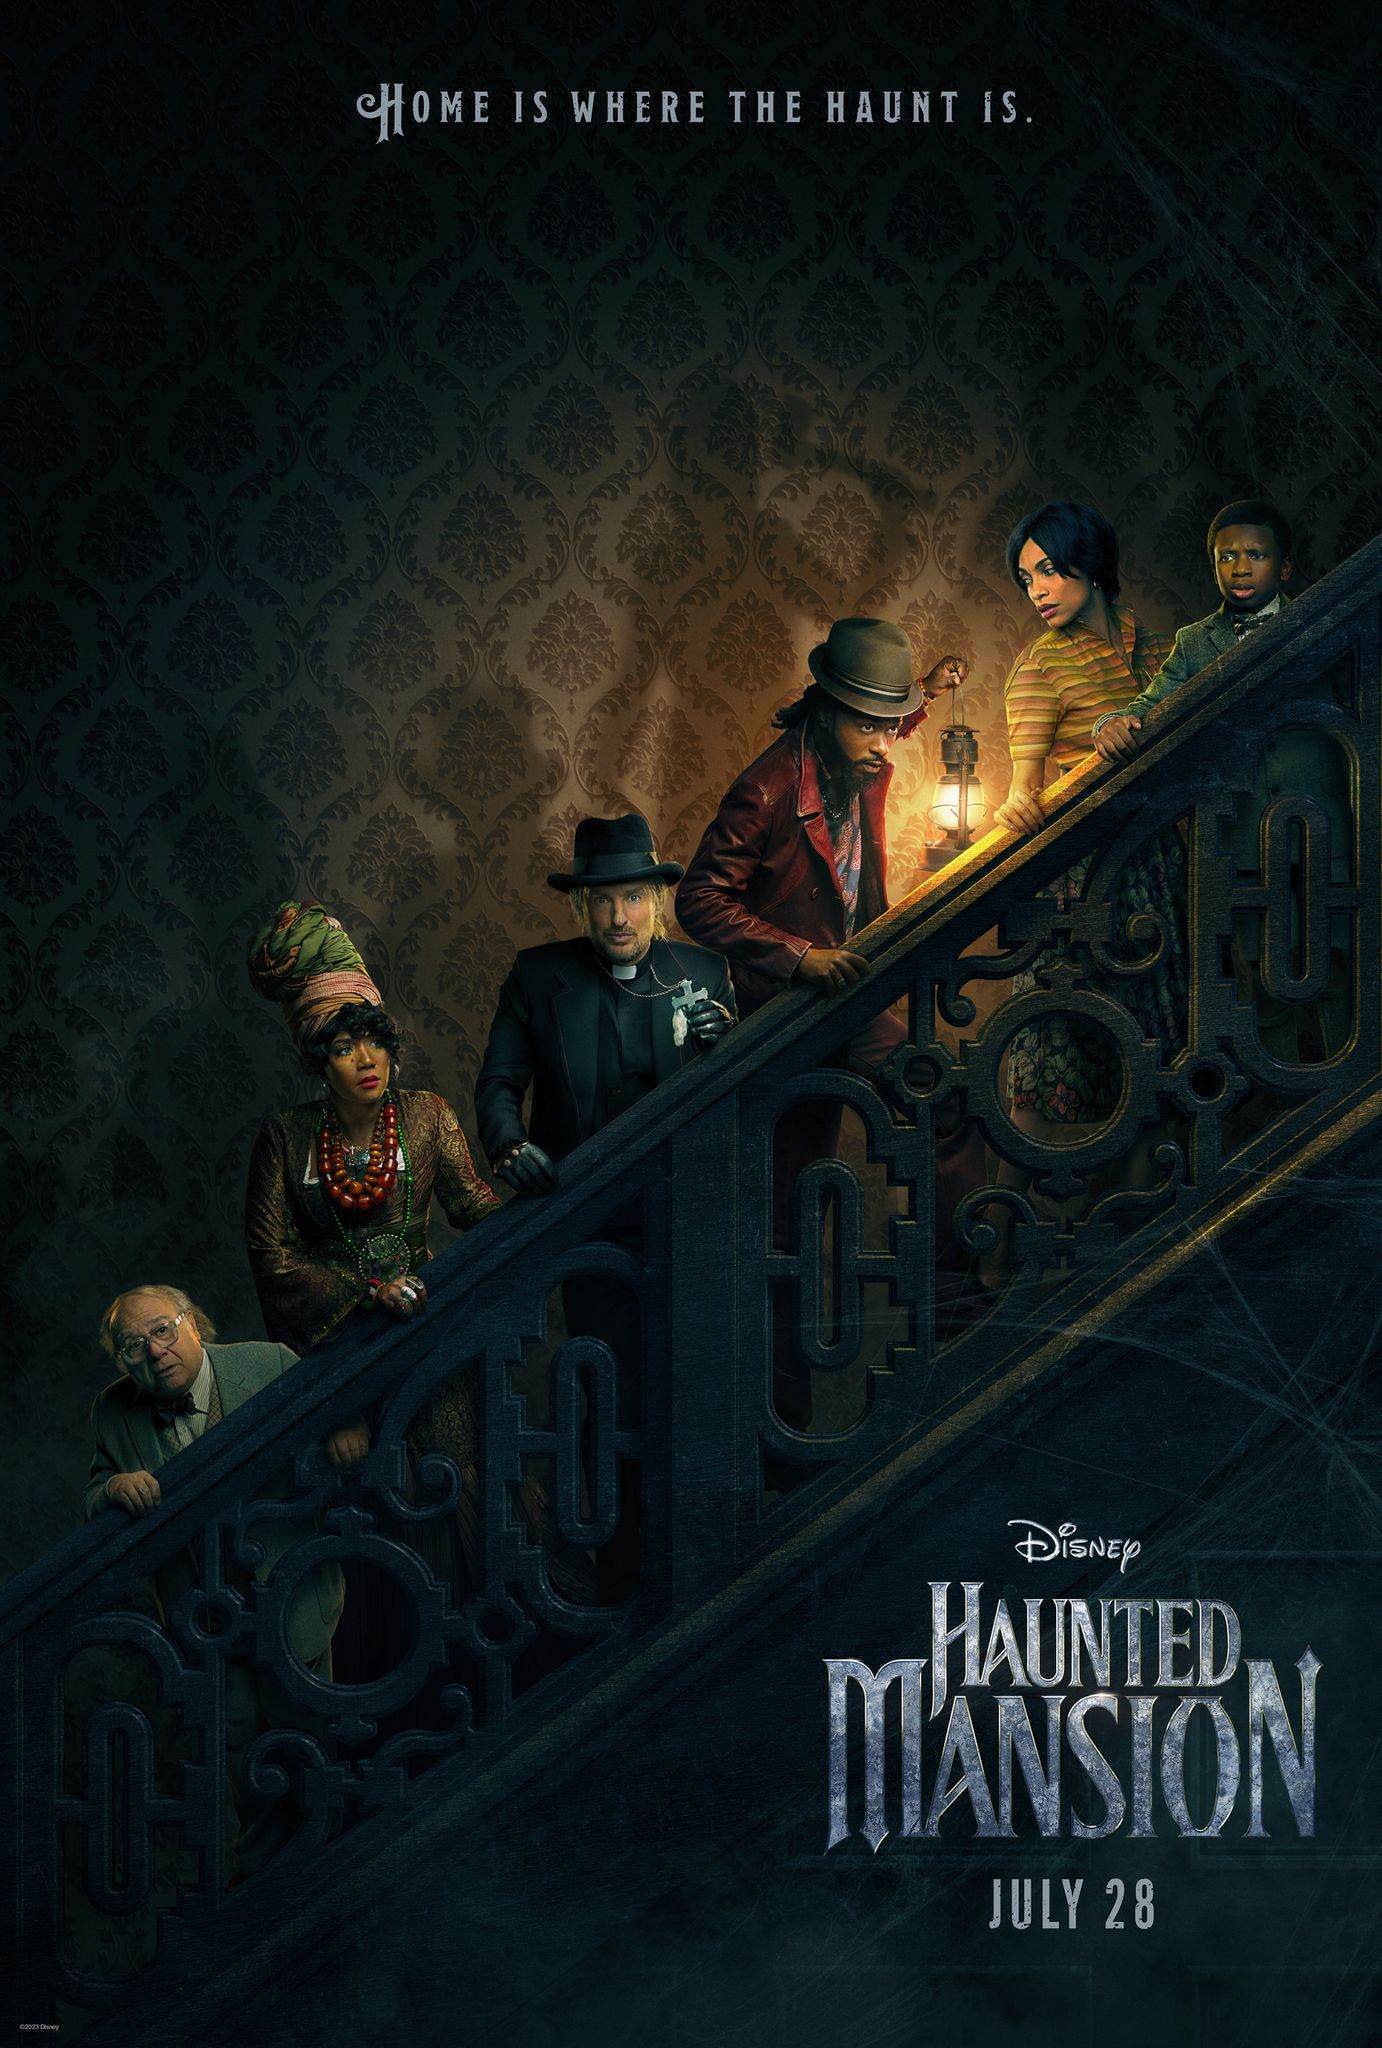 Haunted Mansion poster featuring core cast members walking up a staircase.